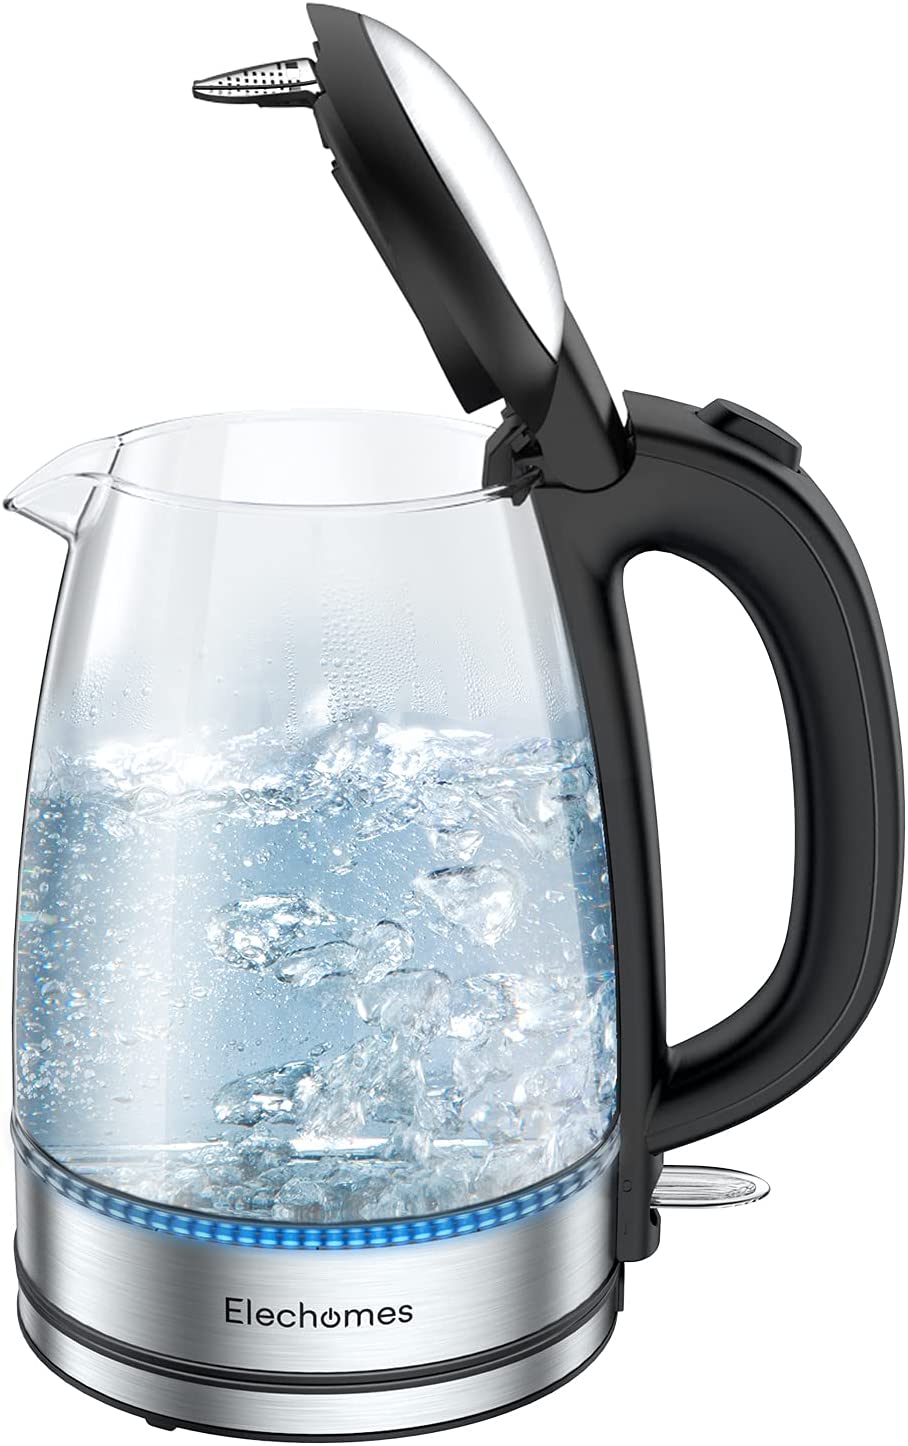 Review of Elechomes 1.7L Electric Kettle, Cordless Portable Glass Tea Kettle